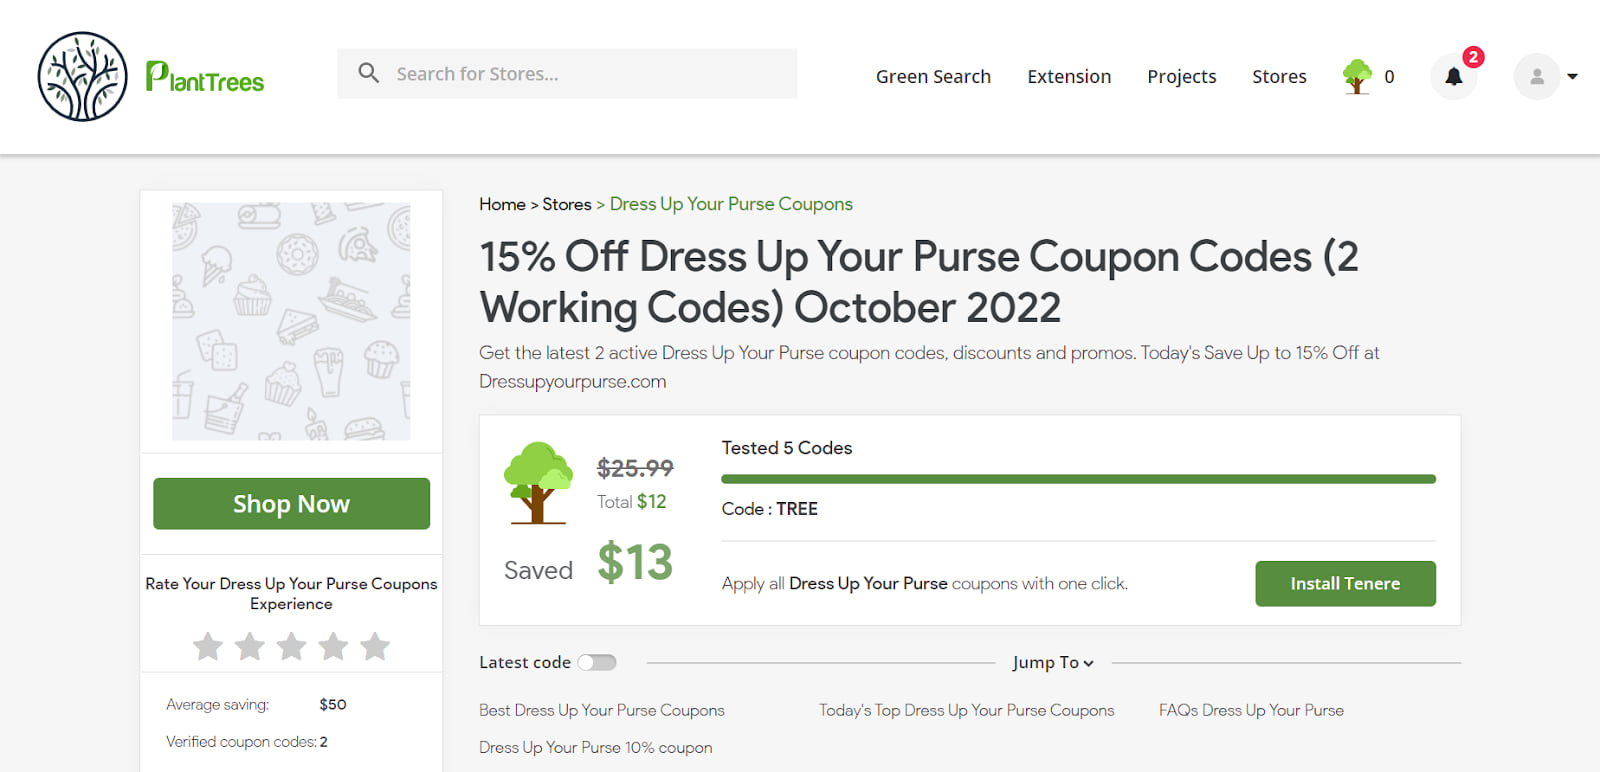 How to use Dress Up Your Purse coupon